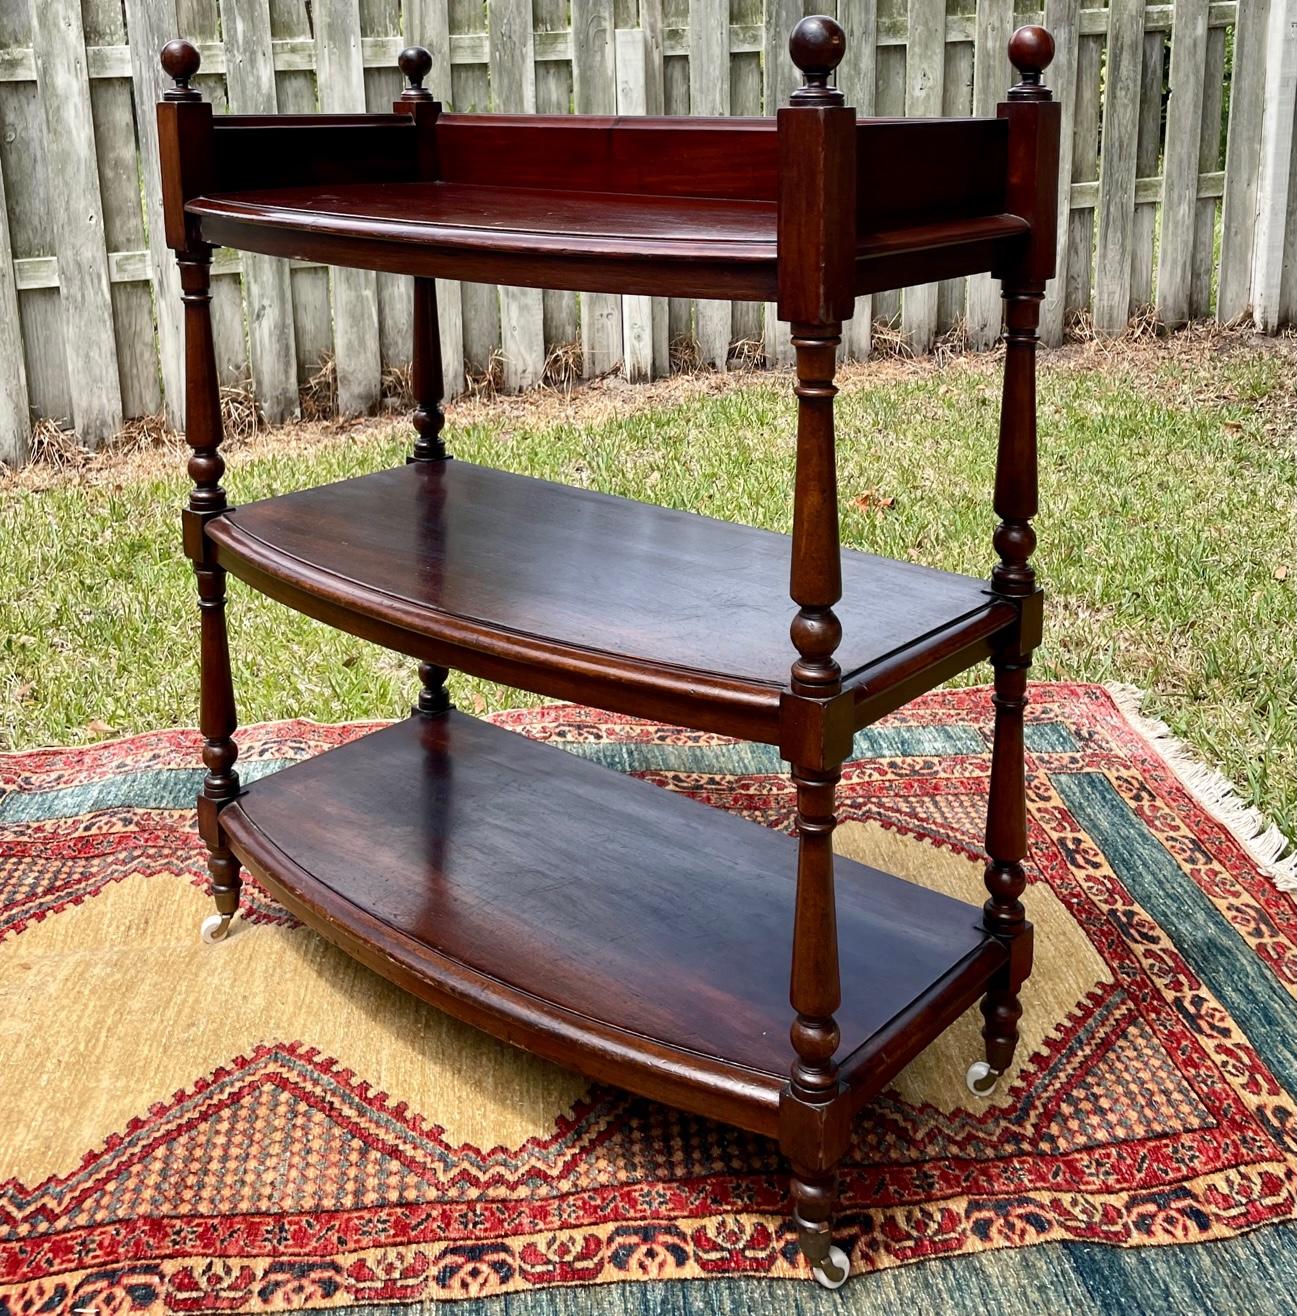 English Regency style mahogany three tier dessert buffet

Fabulous 19th century mahogany three-tiered buffet trolley or server. The wood shelves are supported by four turned leg columns with round ball finials at the top and porcelain casters on the